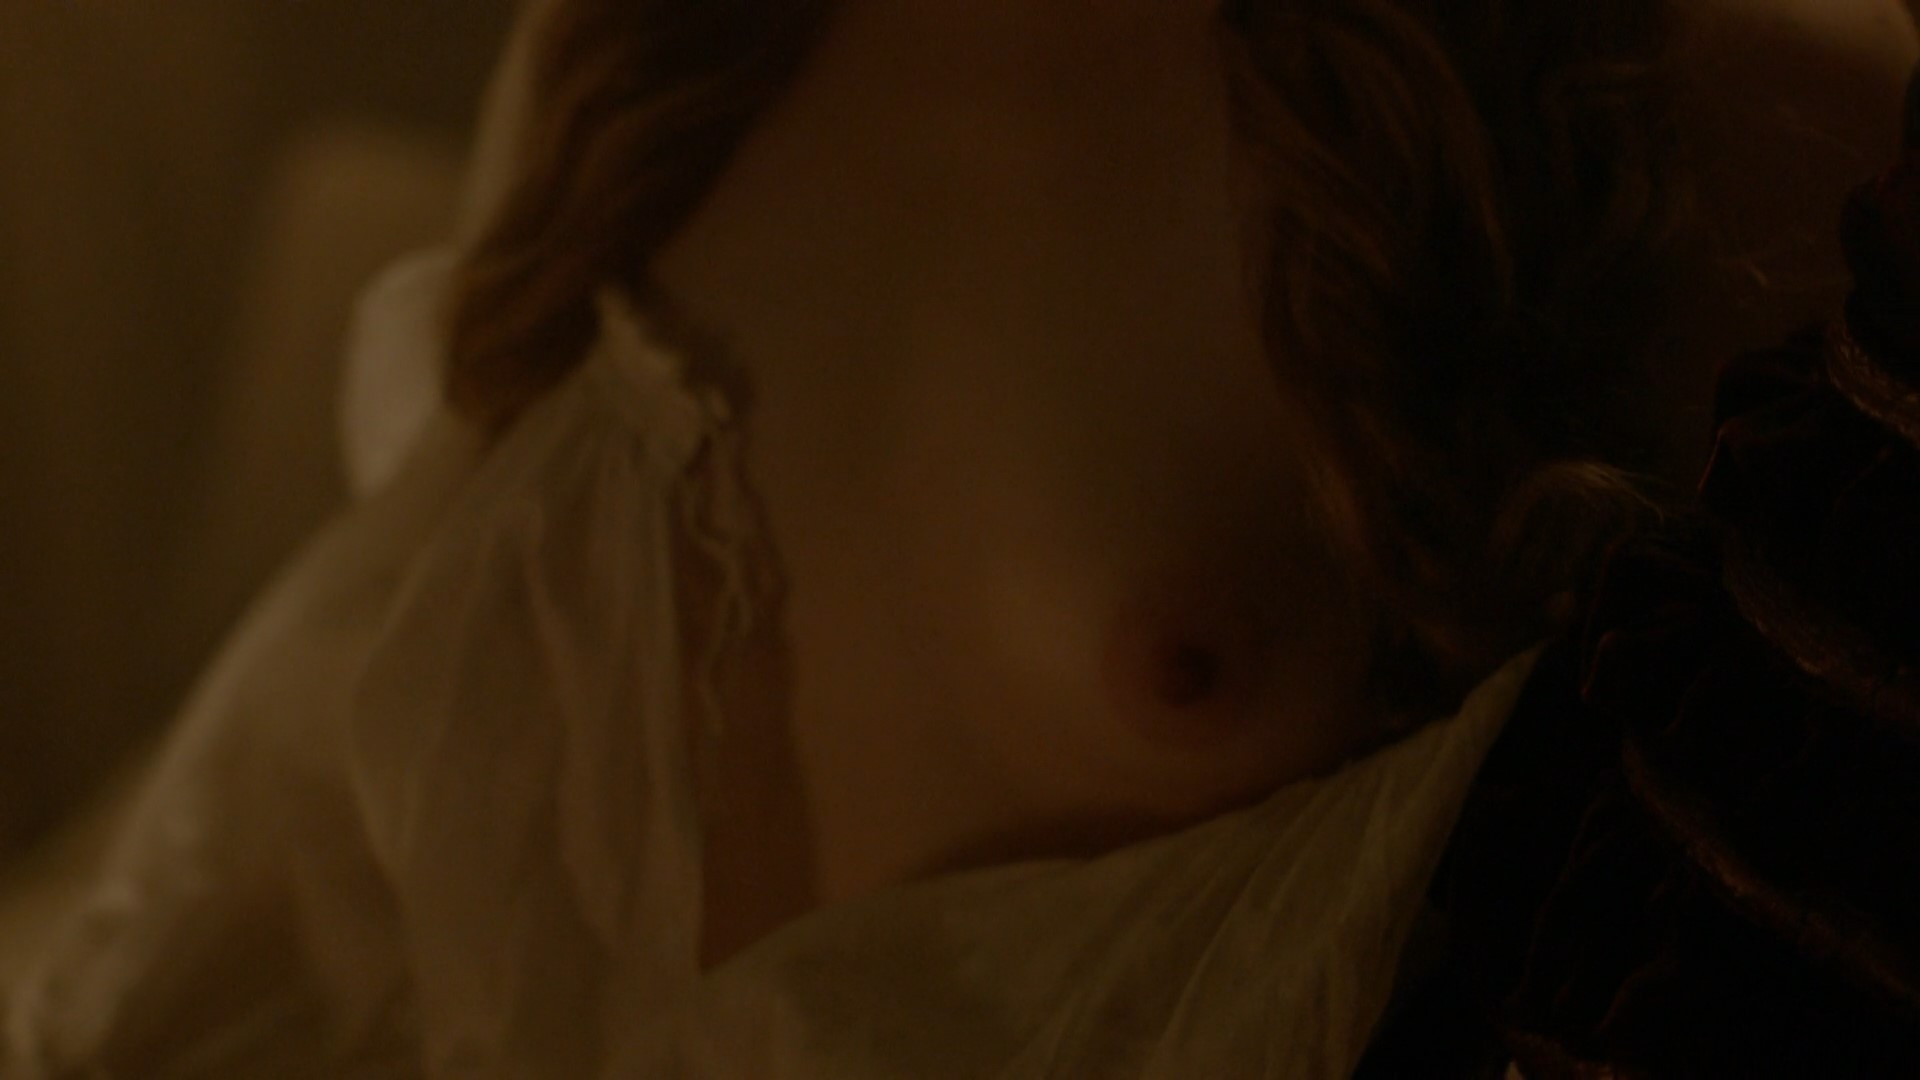 Tits holliday grainger Search Holliday